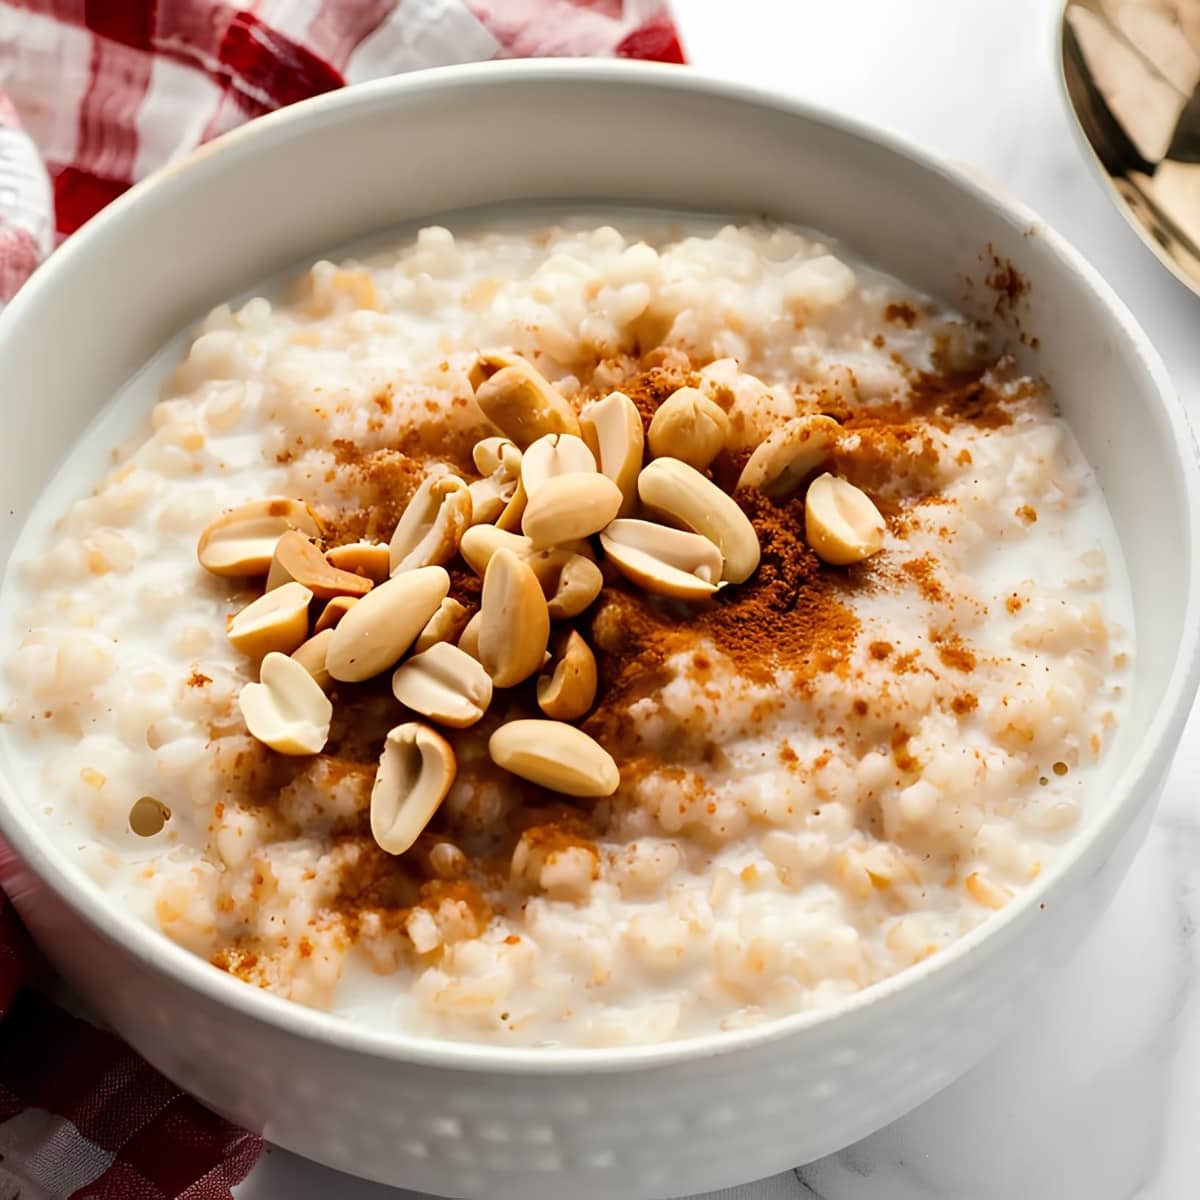 Creamy and delicious mexican rice pudding or arroz con leche with cinnamon and nuts in a white bowl